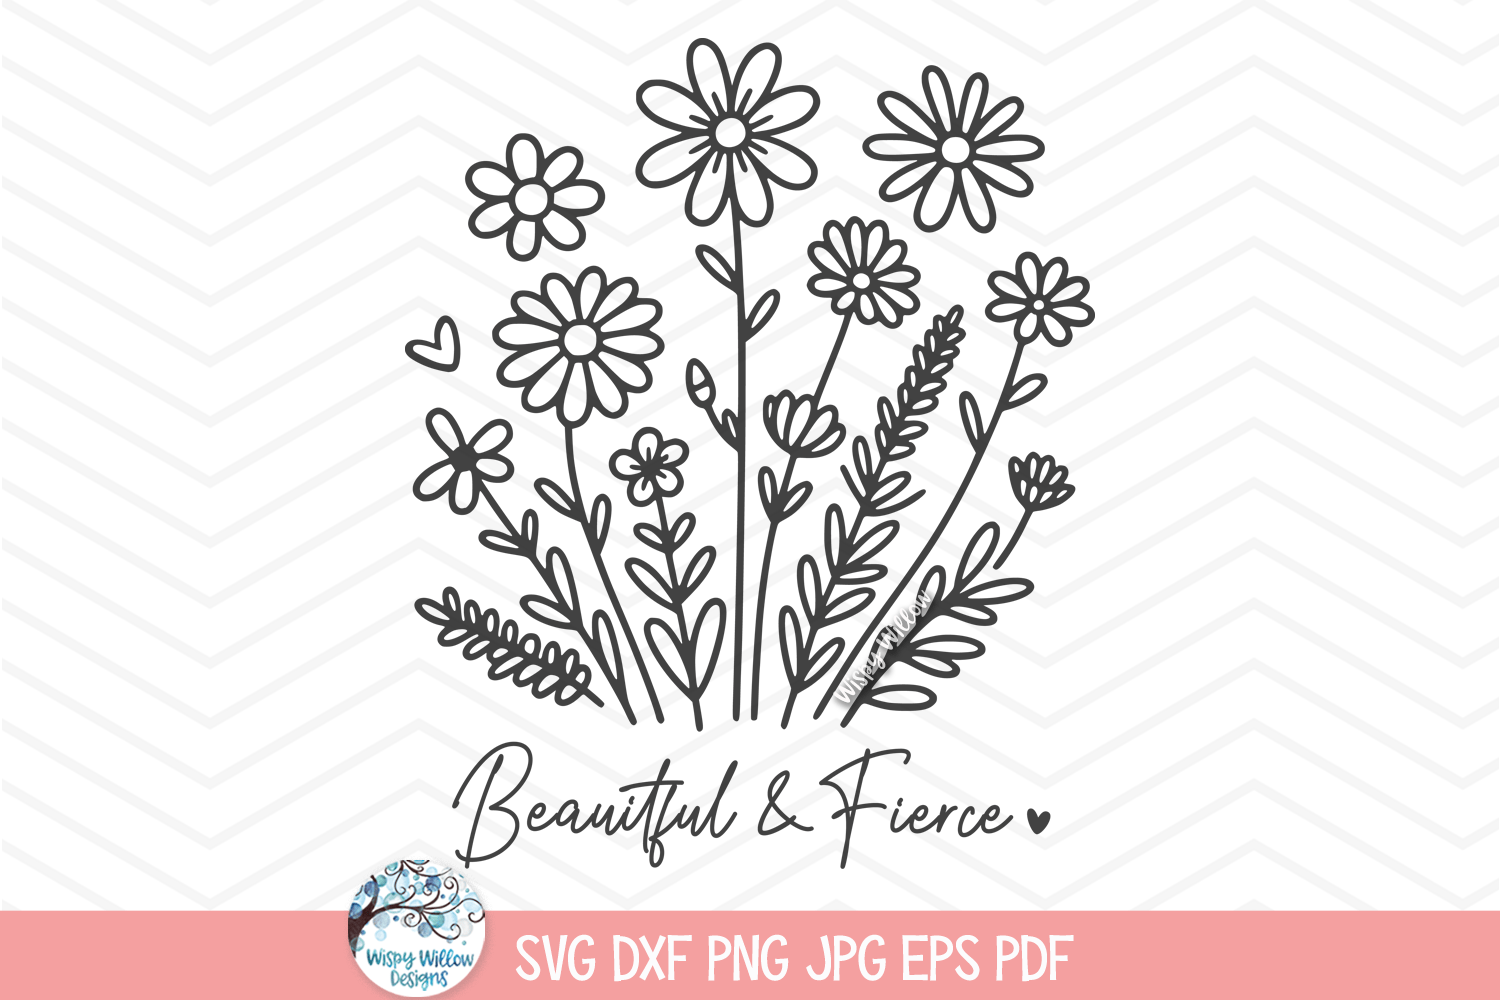 Beautiful And Fierce SVG | Floral Digital Illustration Wispy Willow Designs Company